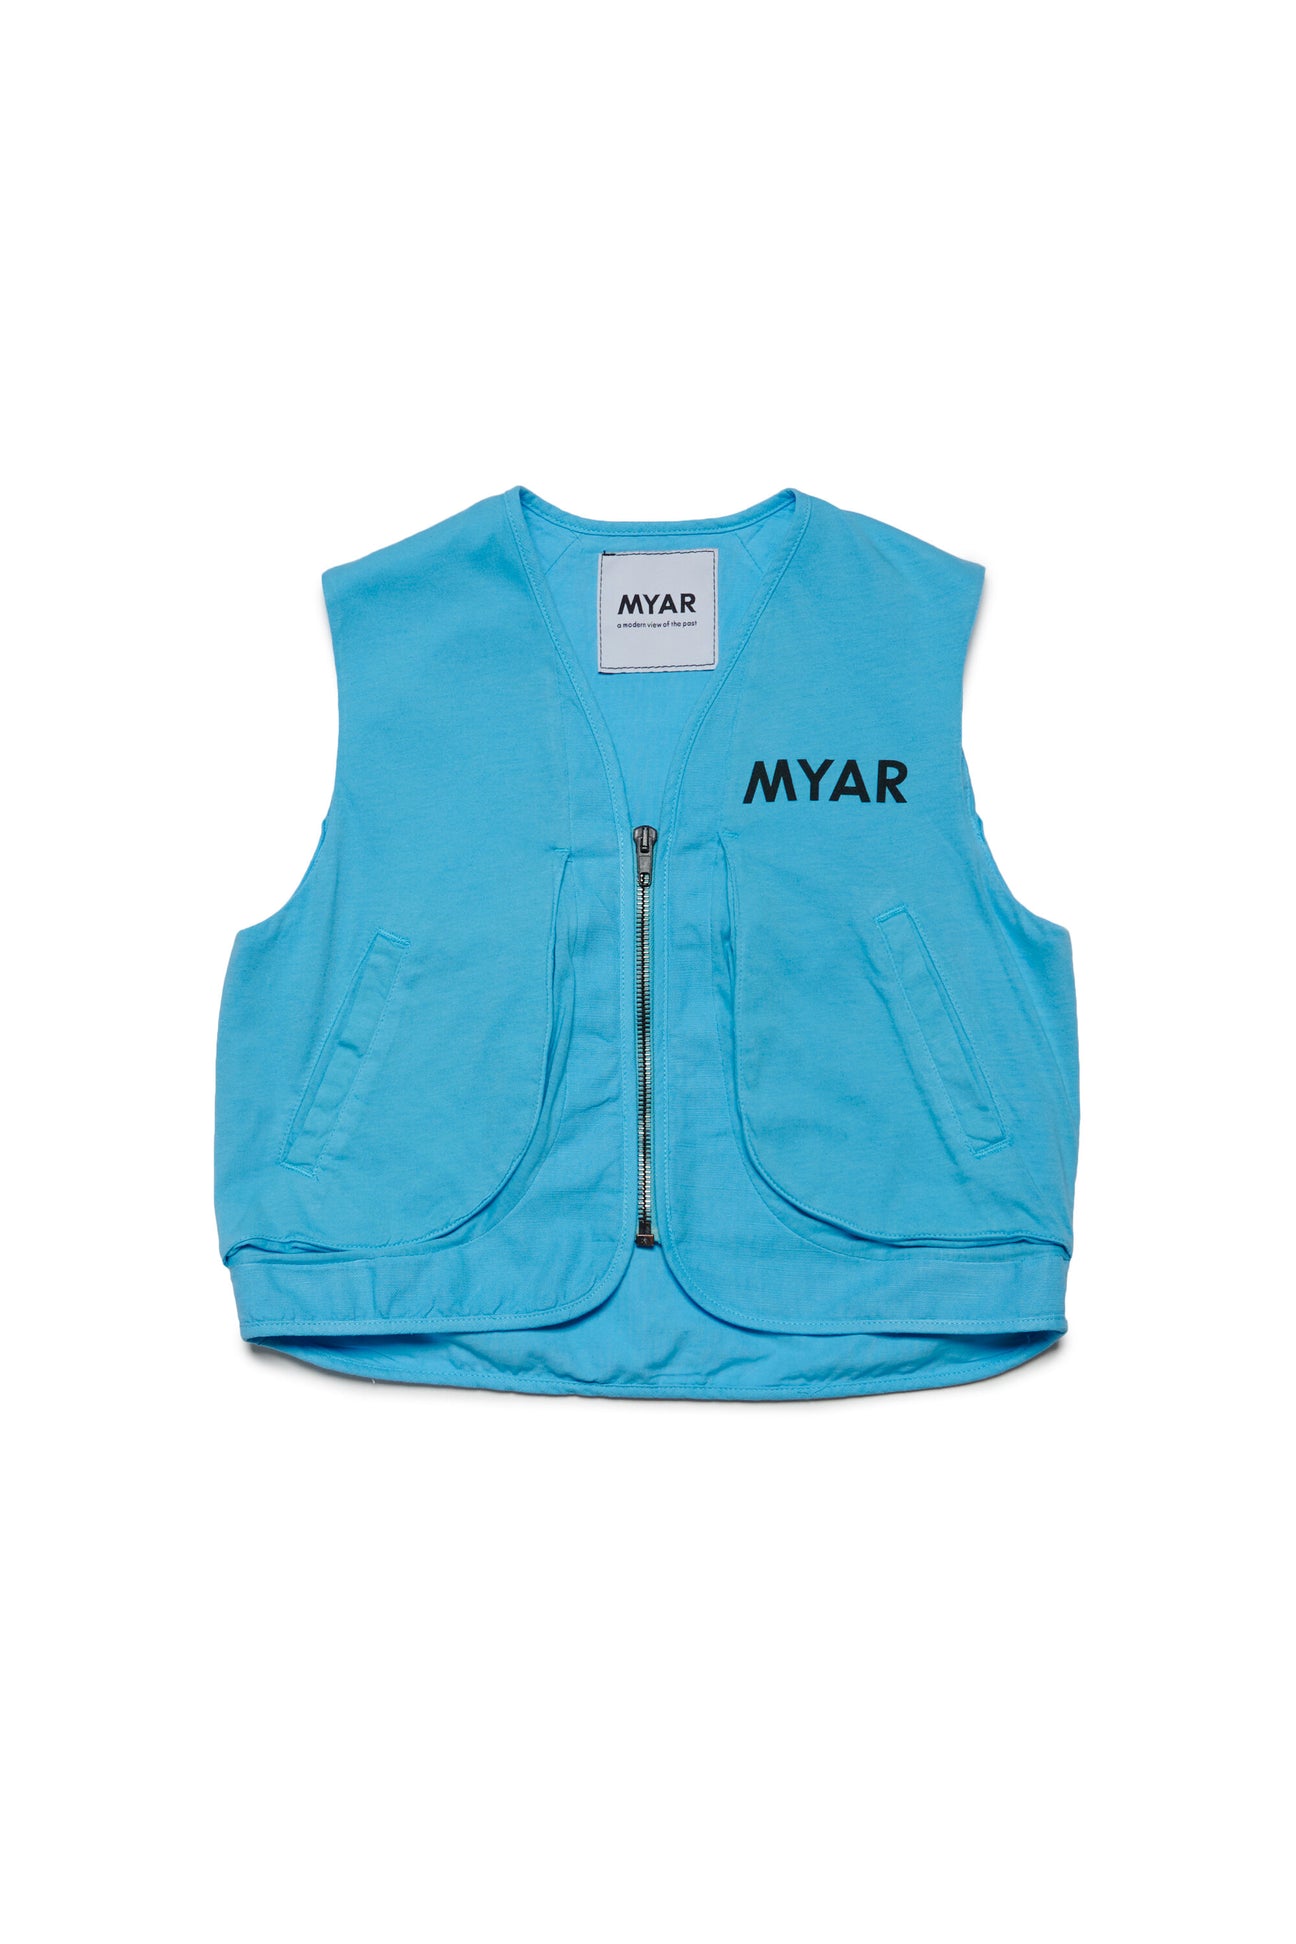 Vest jacket in deadstock and linen with MYAR logo Vest jacket in deadstock and linen with MYAR logo